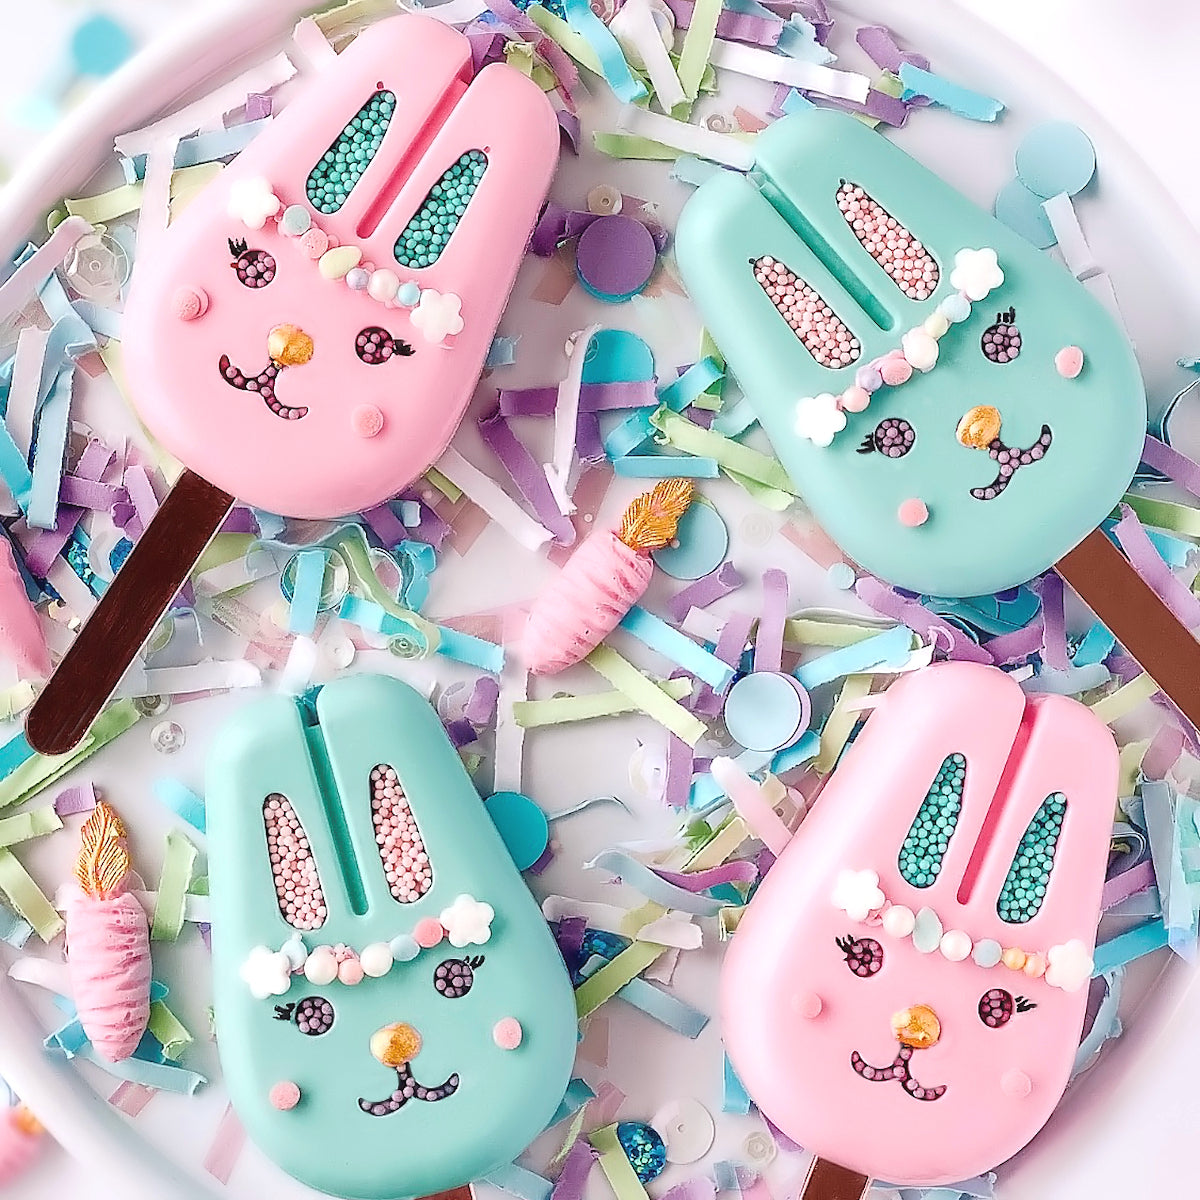 Bunny Sweets + Desserts For Spring